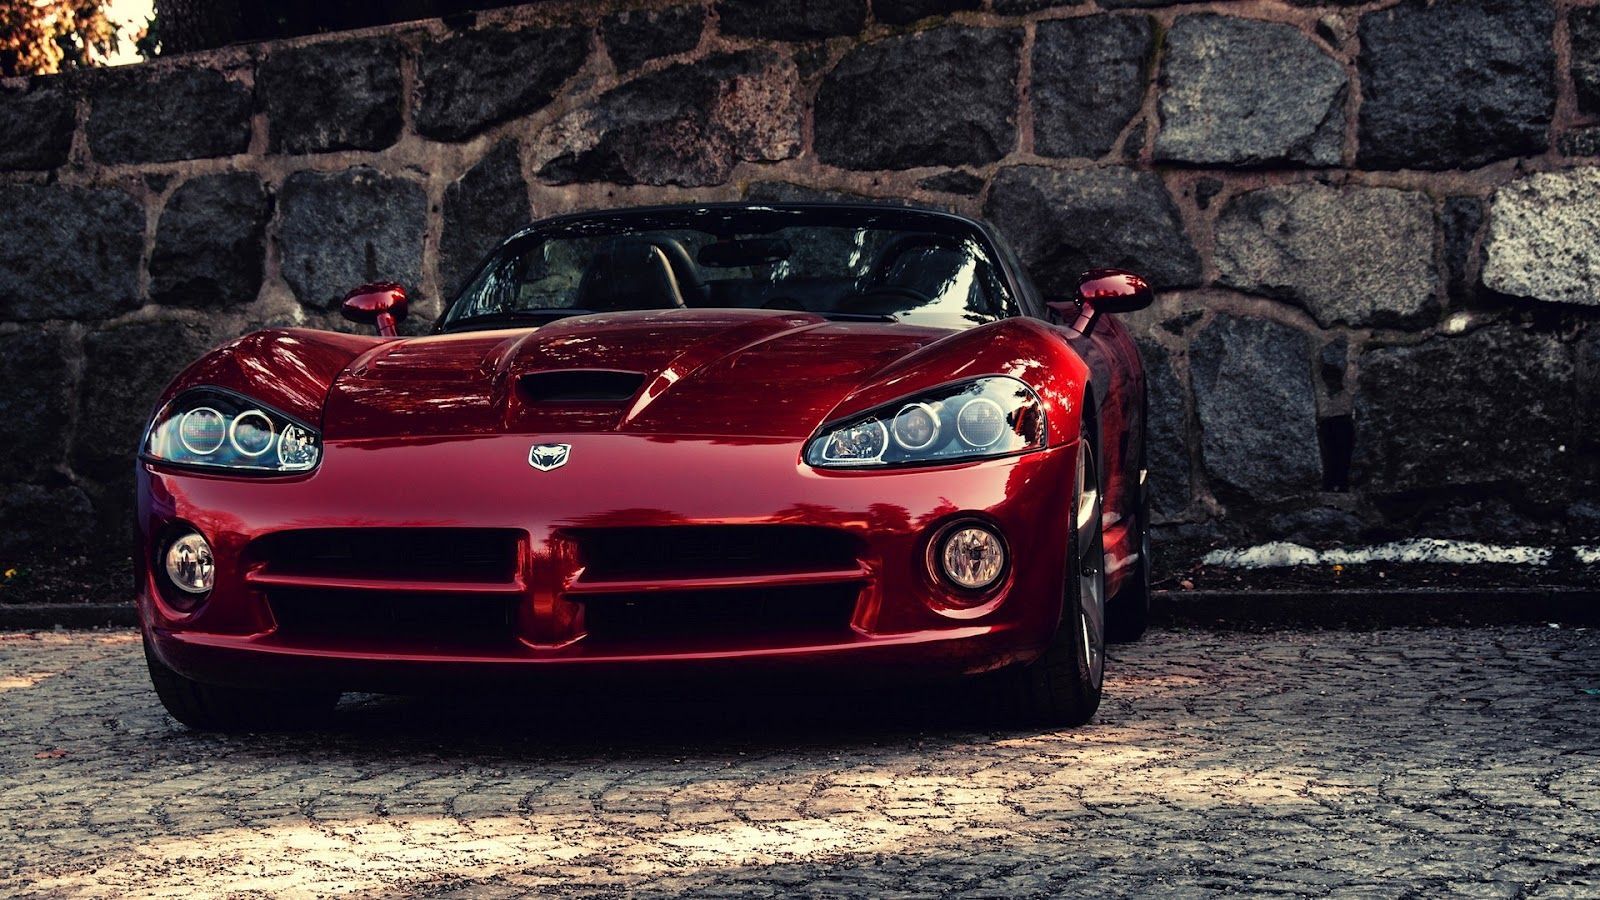 Sports car hd wallpapers for pc | Cars And Motorcyle